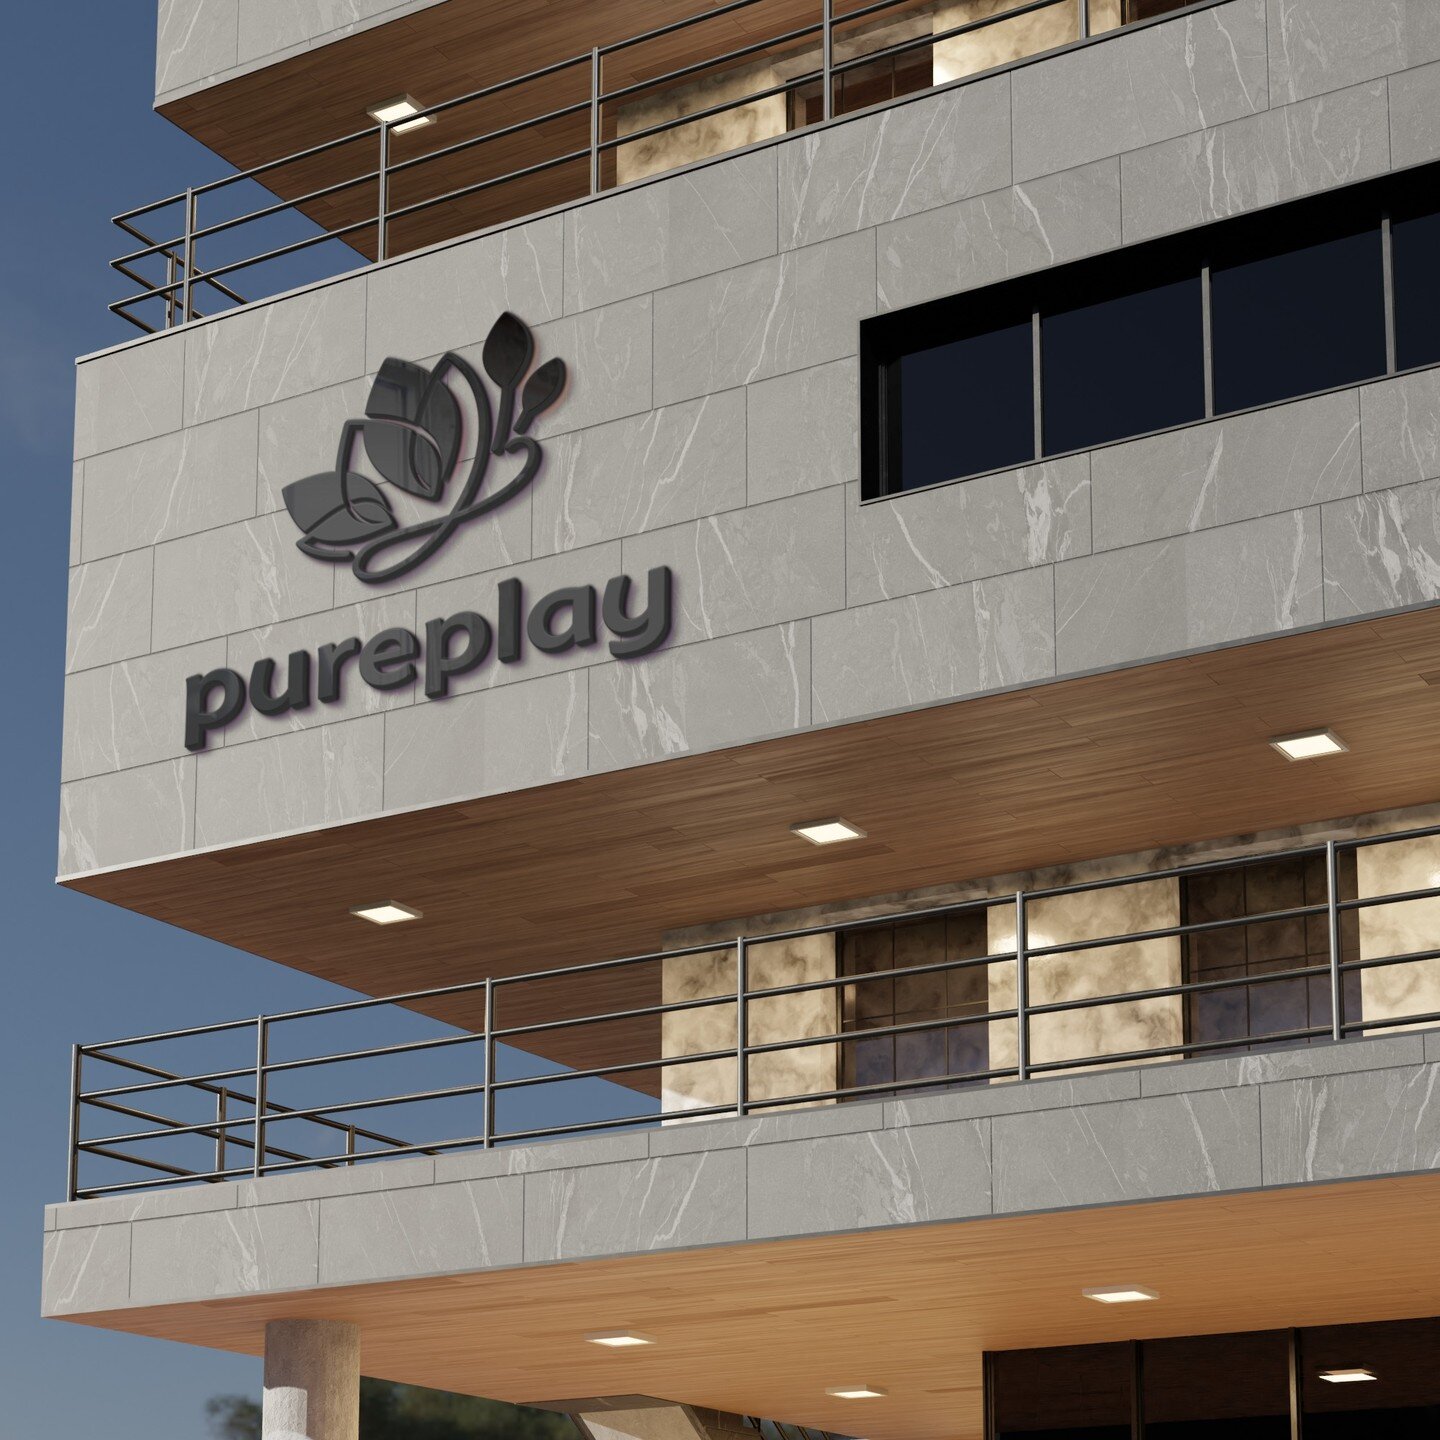 Our project for Pureplay Skin Sciences focused on defining and showcasing the new pillars of the brand, with the aim of inspiring both employees and customers. By doing so, they hope to continue growing and innovating in the beauty and personal care 